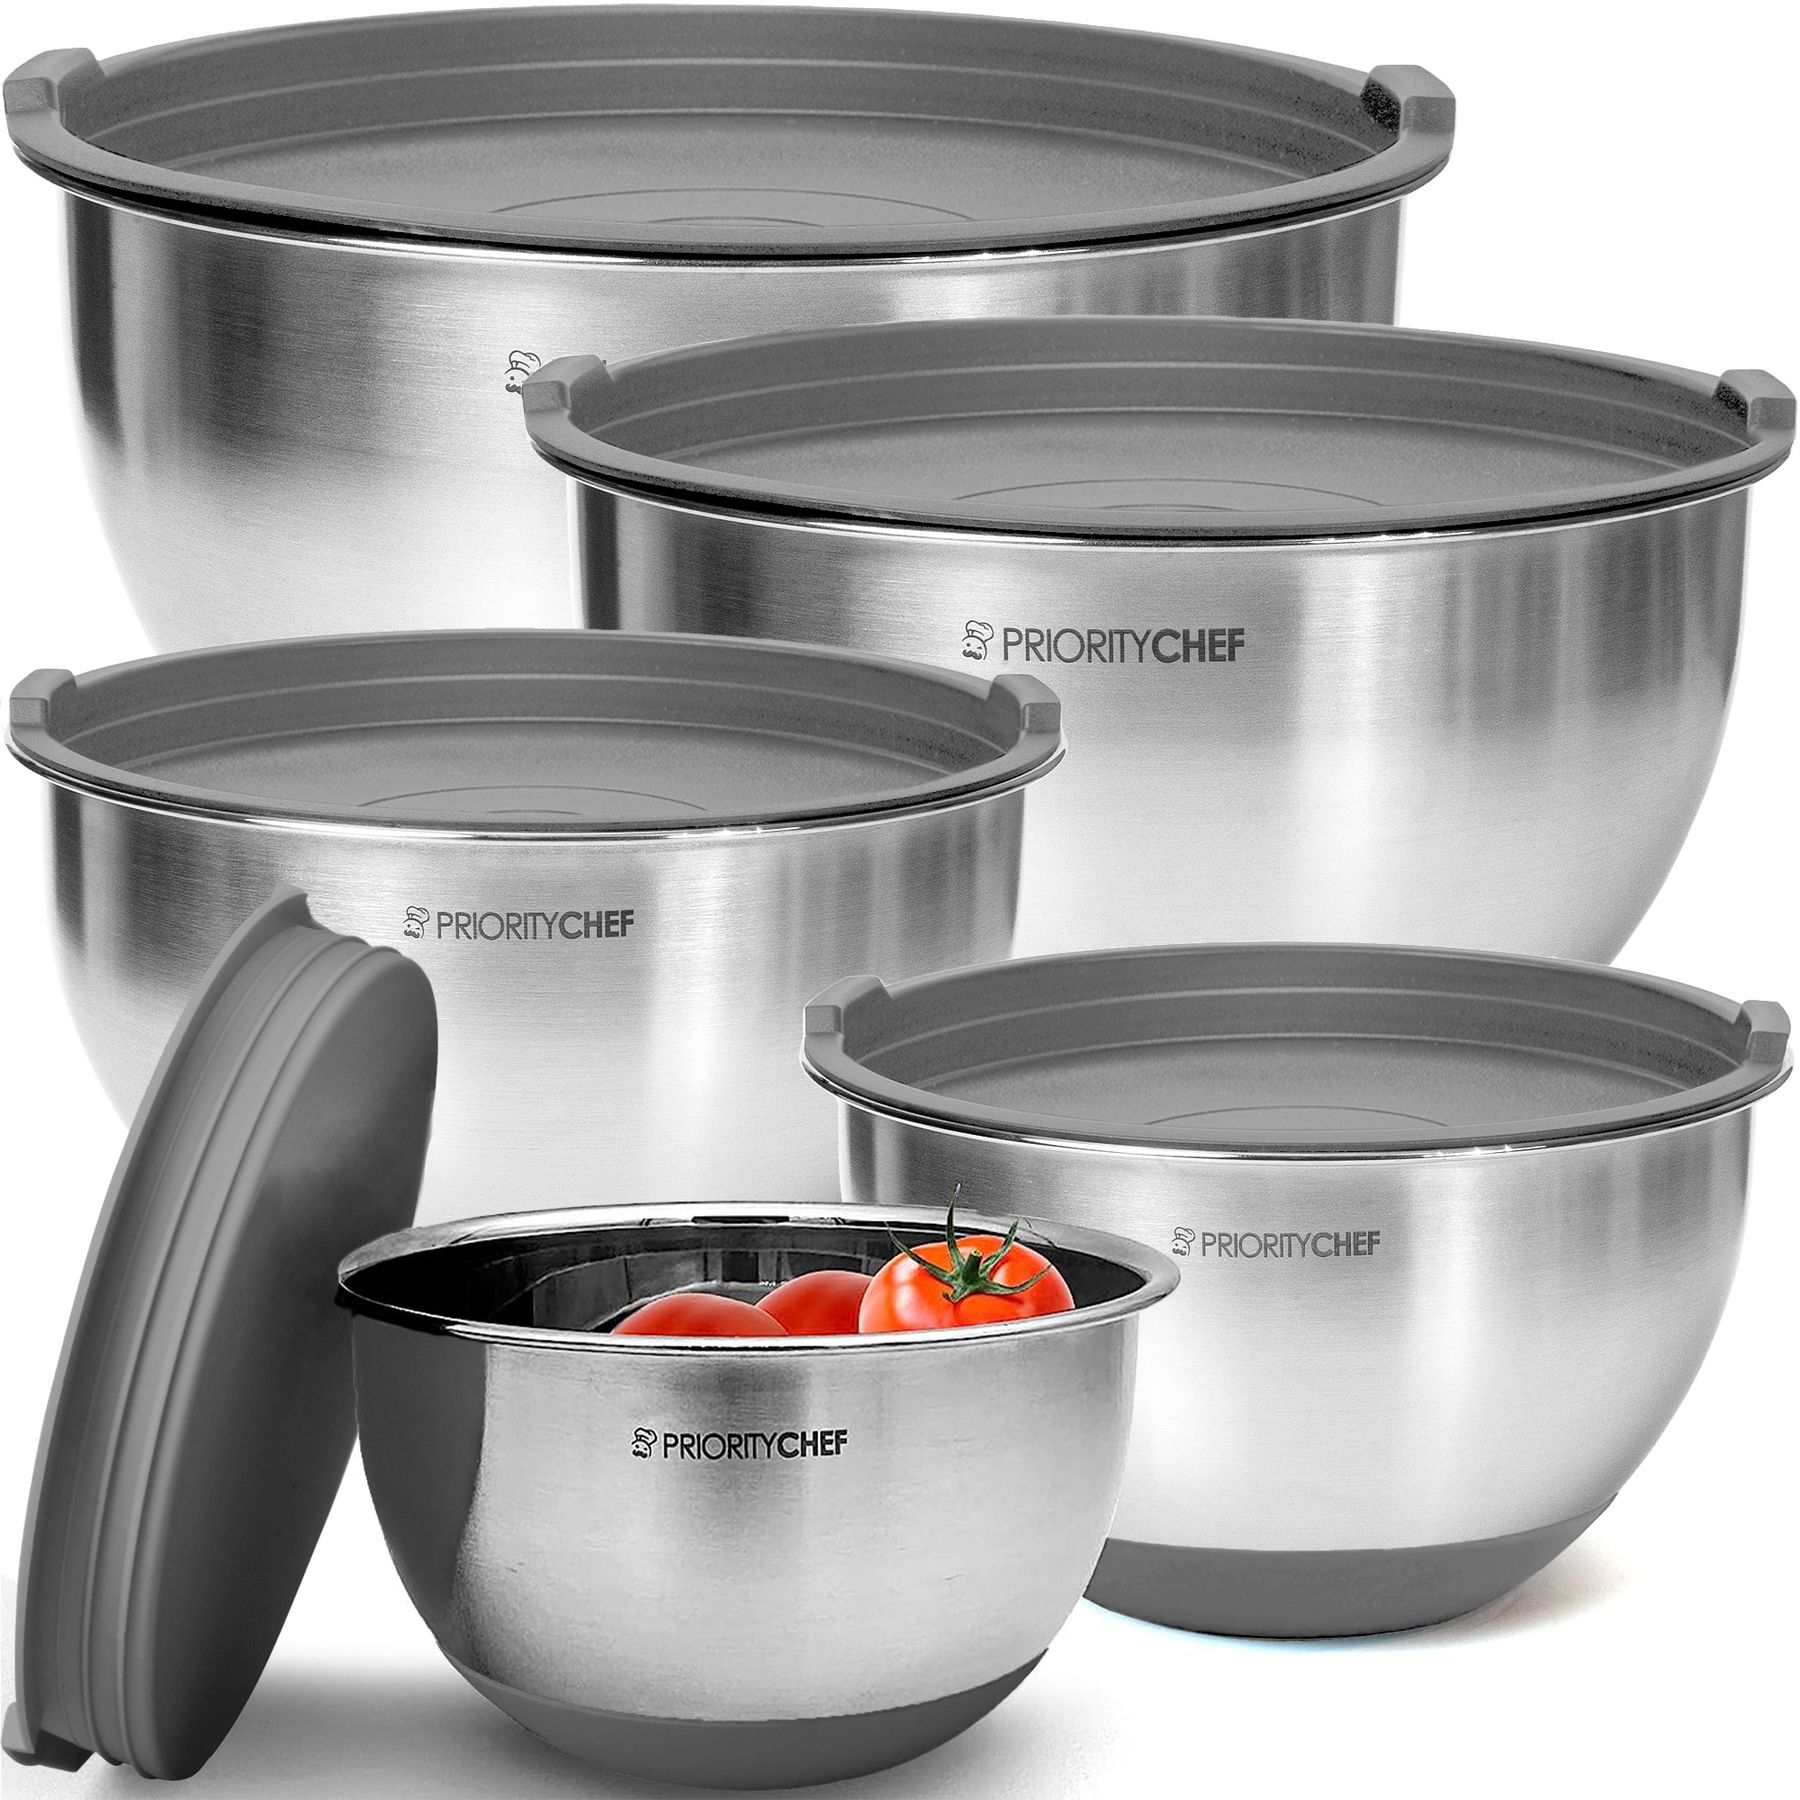 PriorityChef Mixing Bowls With Airtight Lids Set, 1.5/2/3/4/5 Qrt